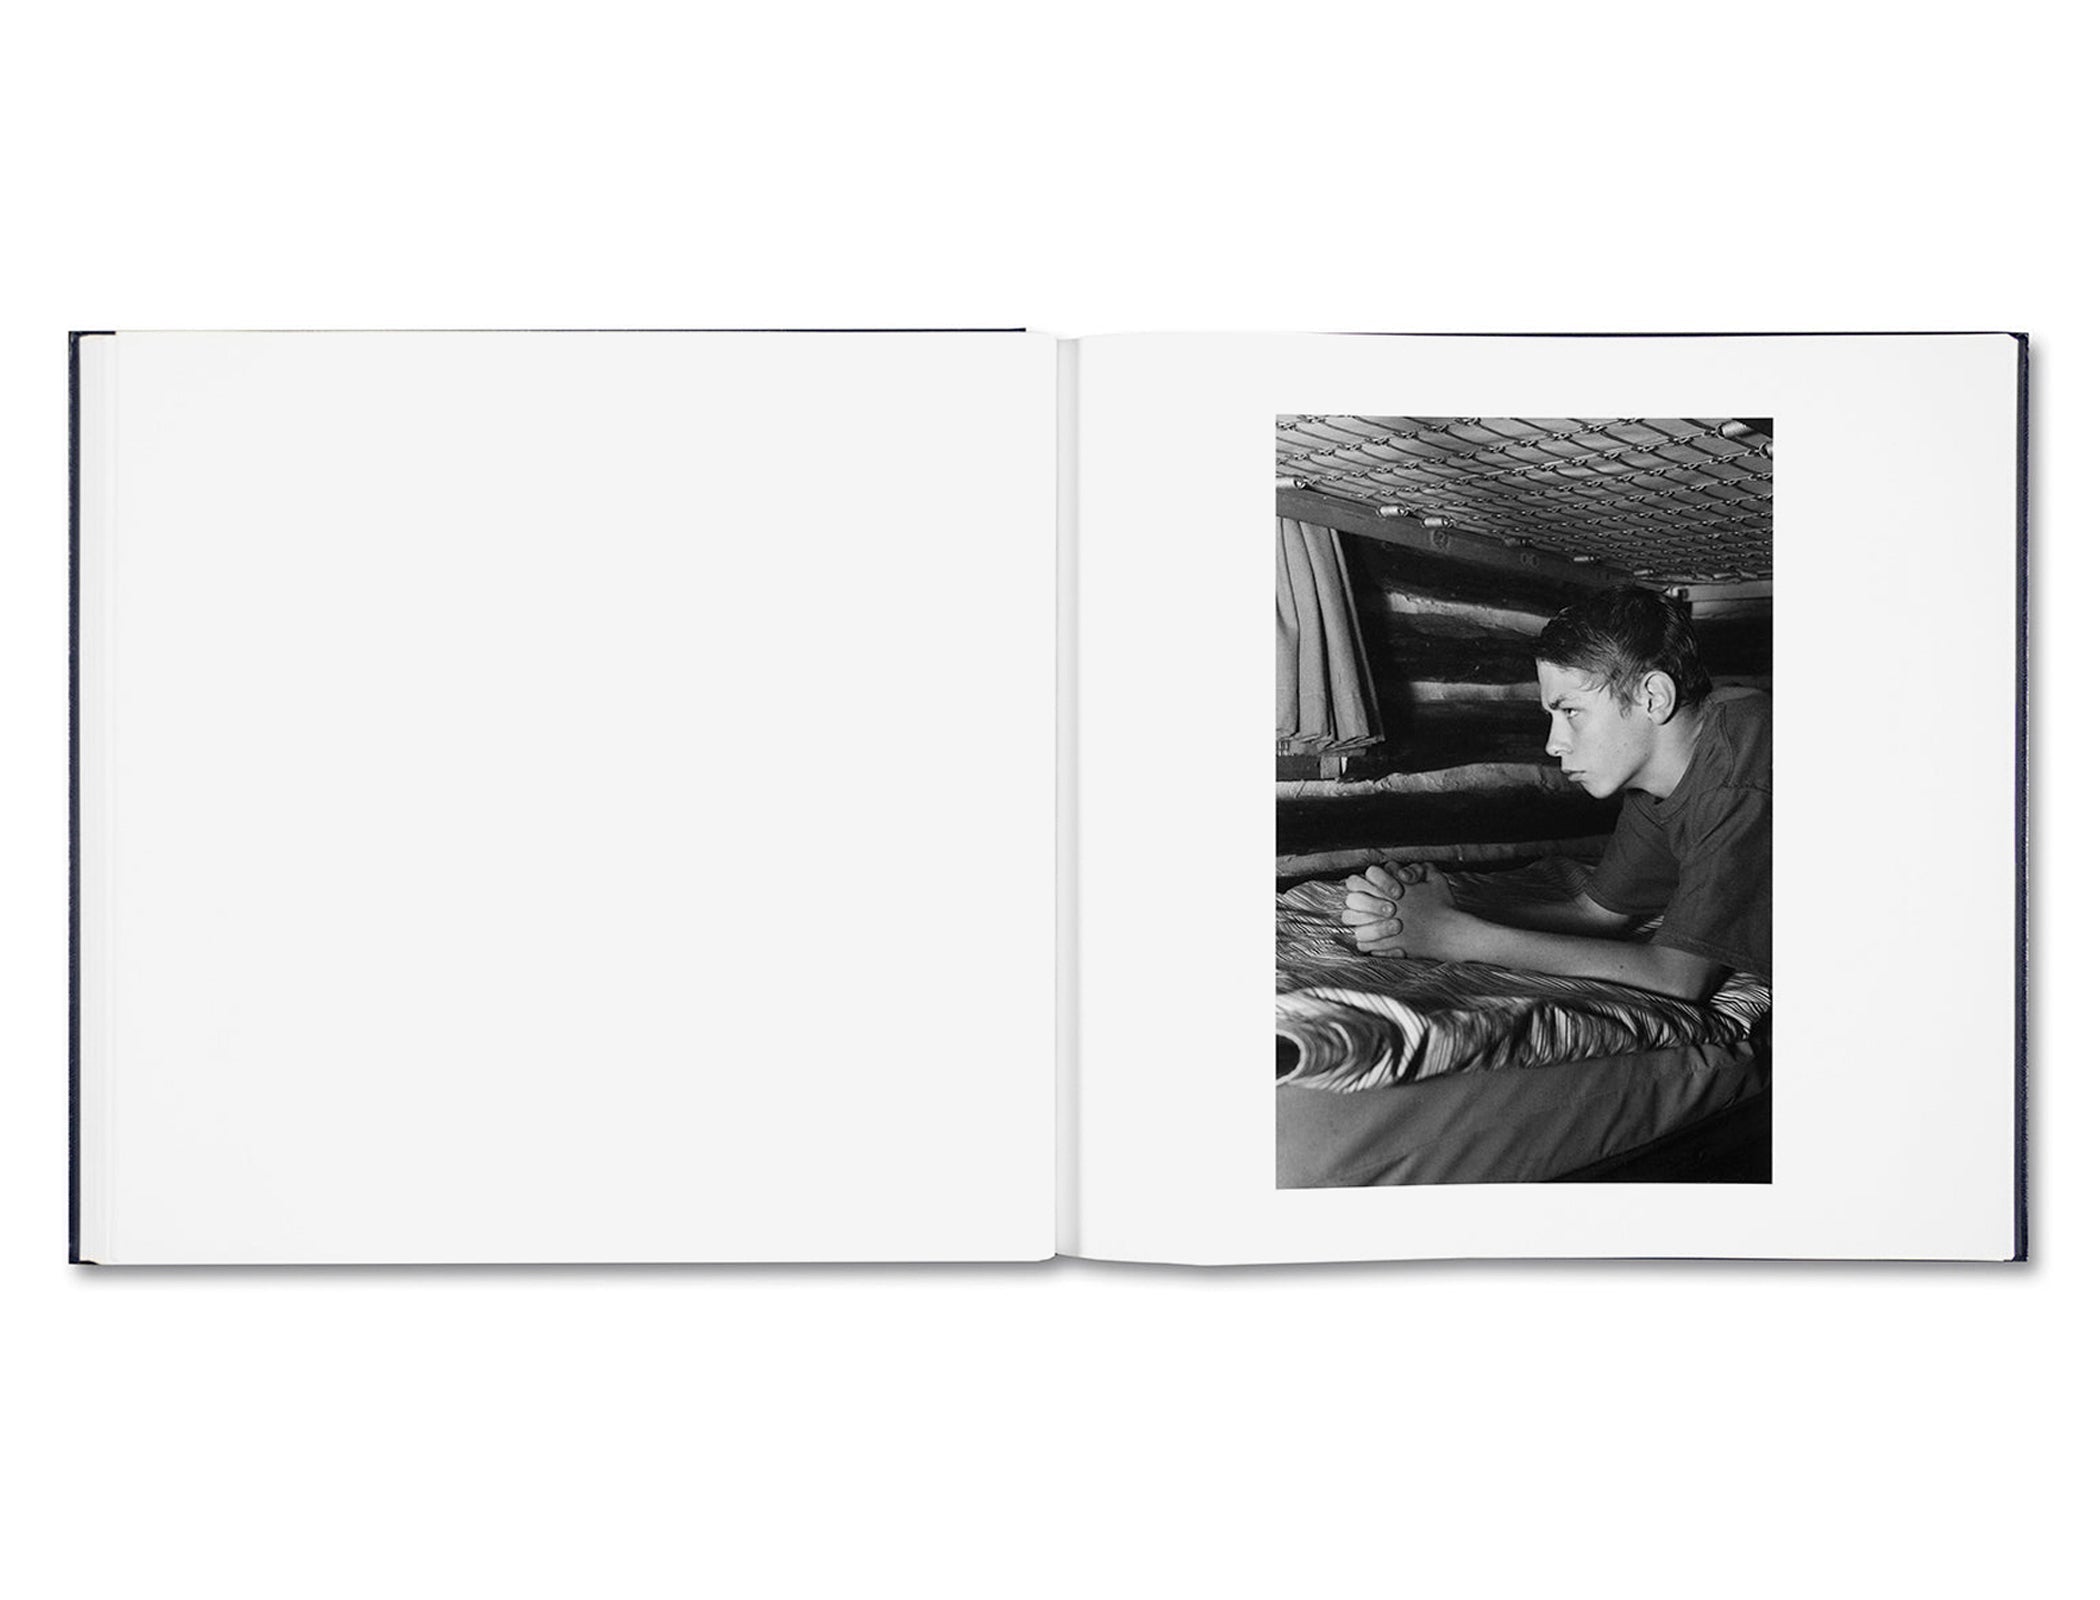 SOME SAY ICE by Alessandra Sanguinetti [DIRECT SIGNED]